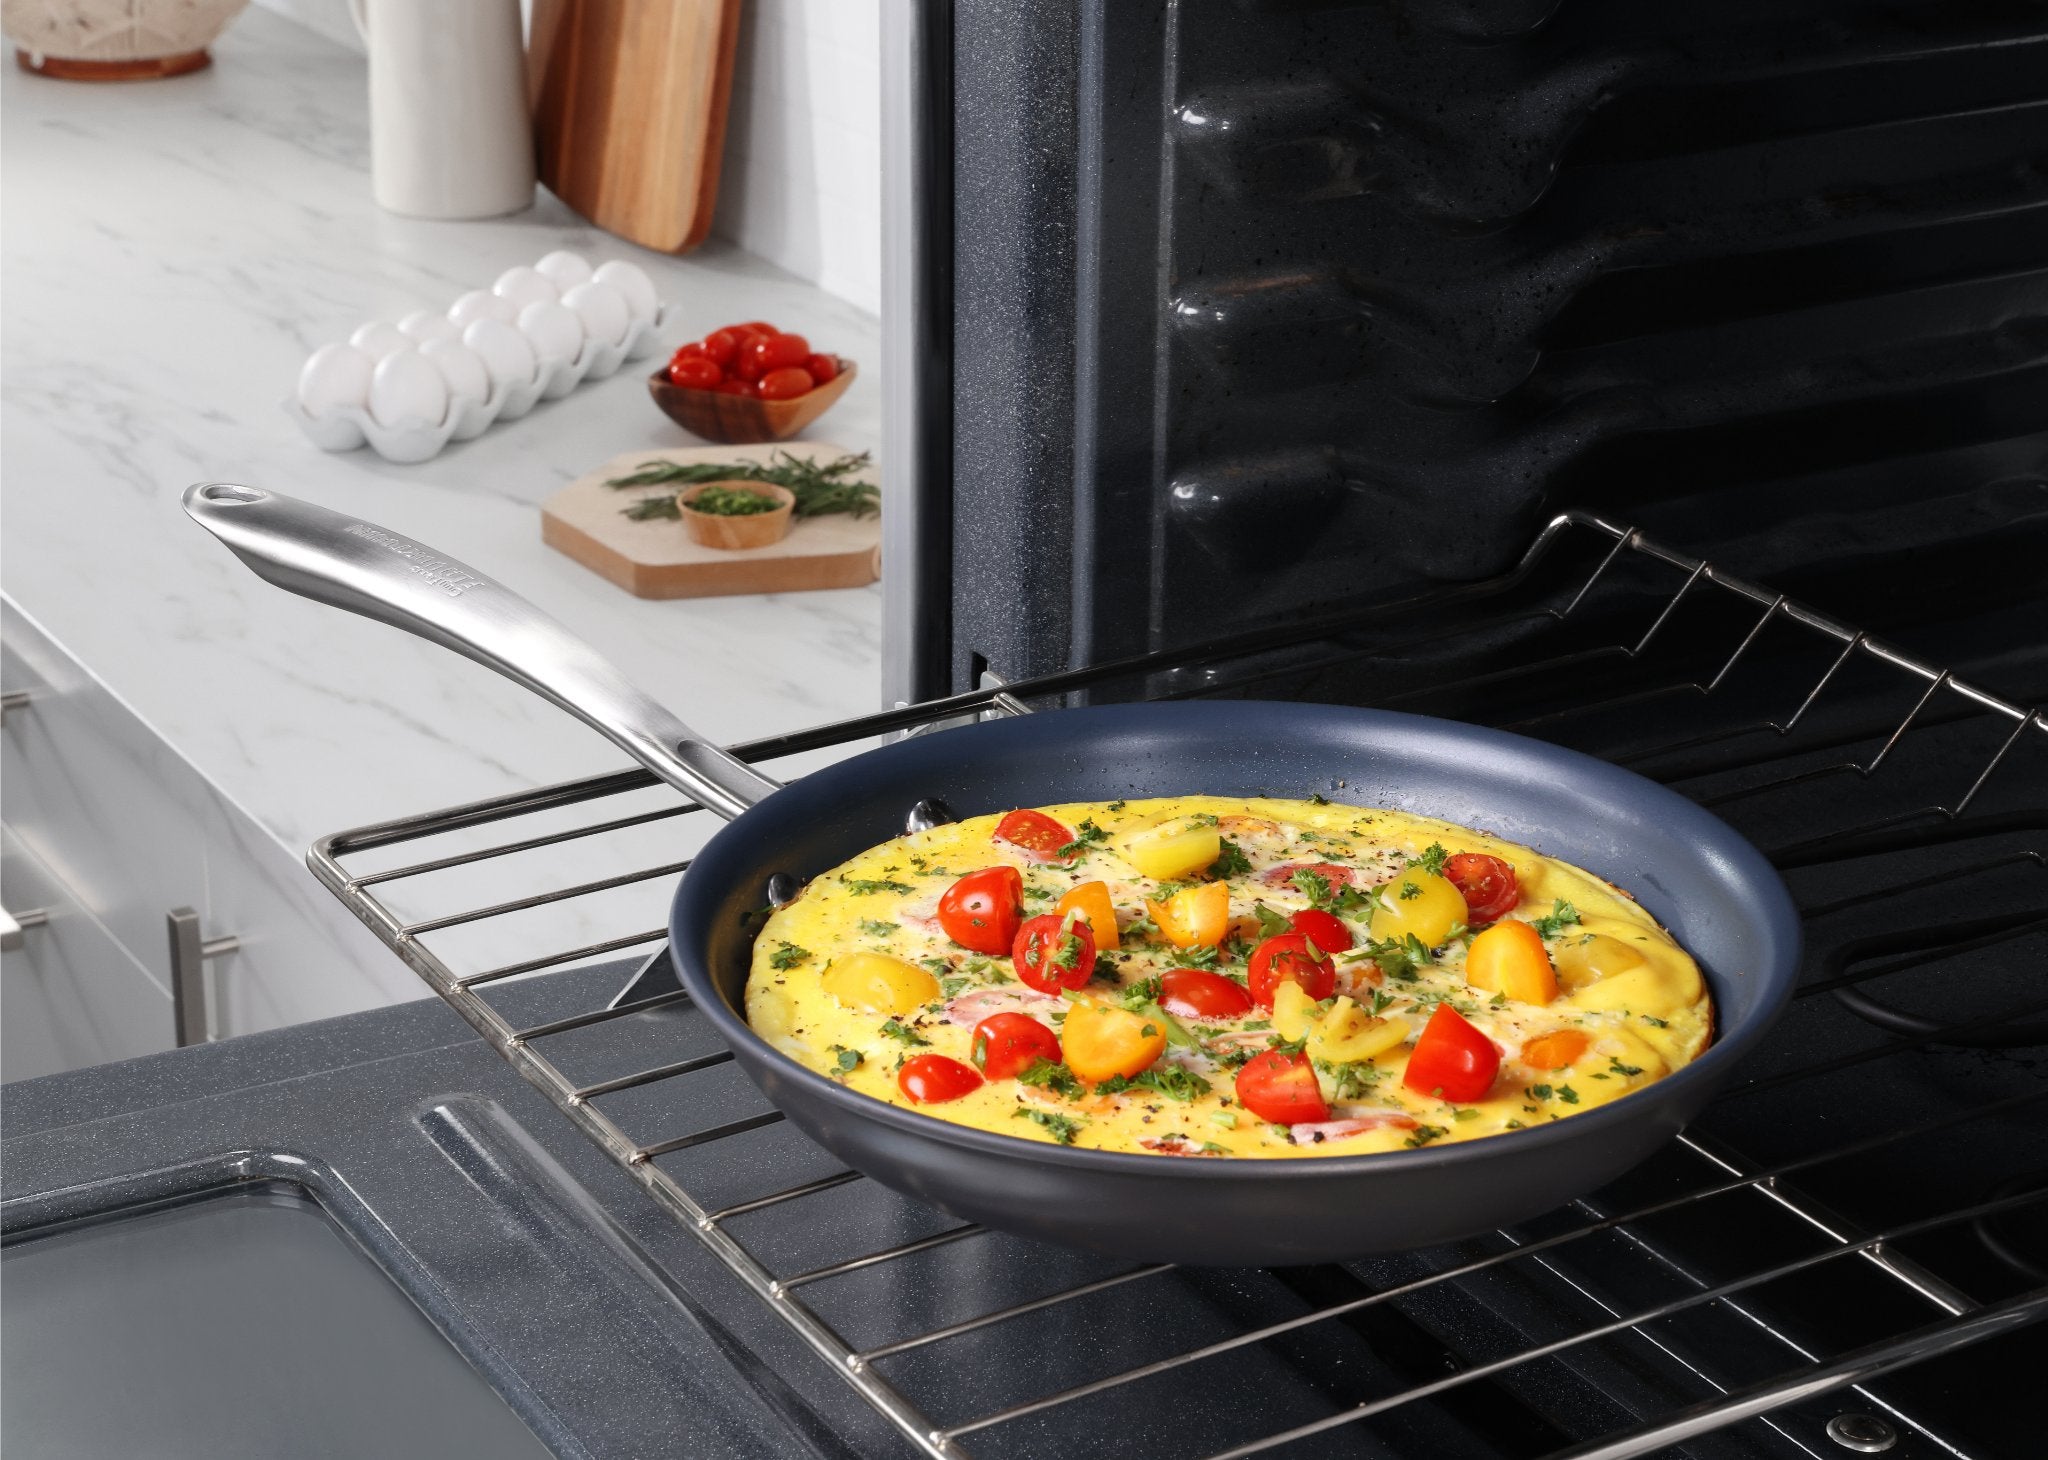 Guy Fieri's Flavortown Laser Titanium 10in Frying Pan with Frittata